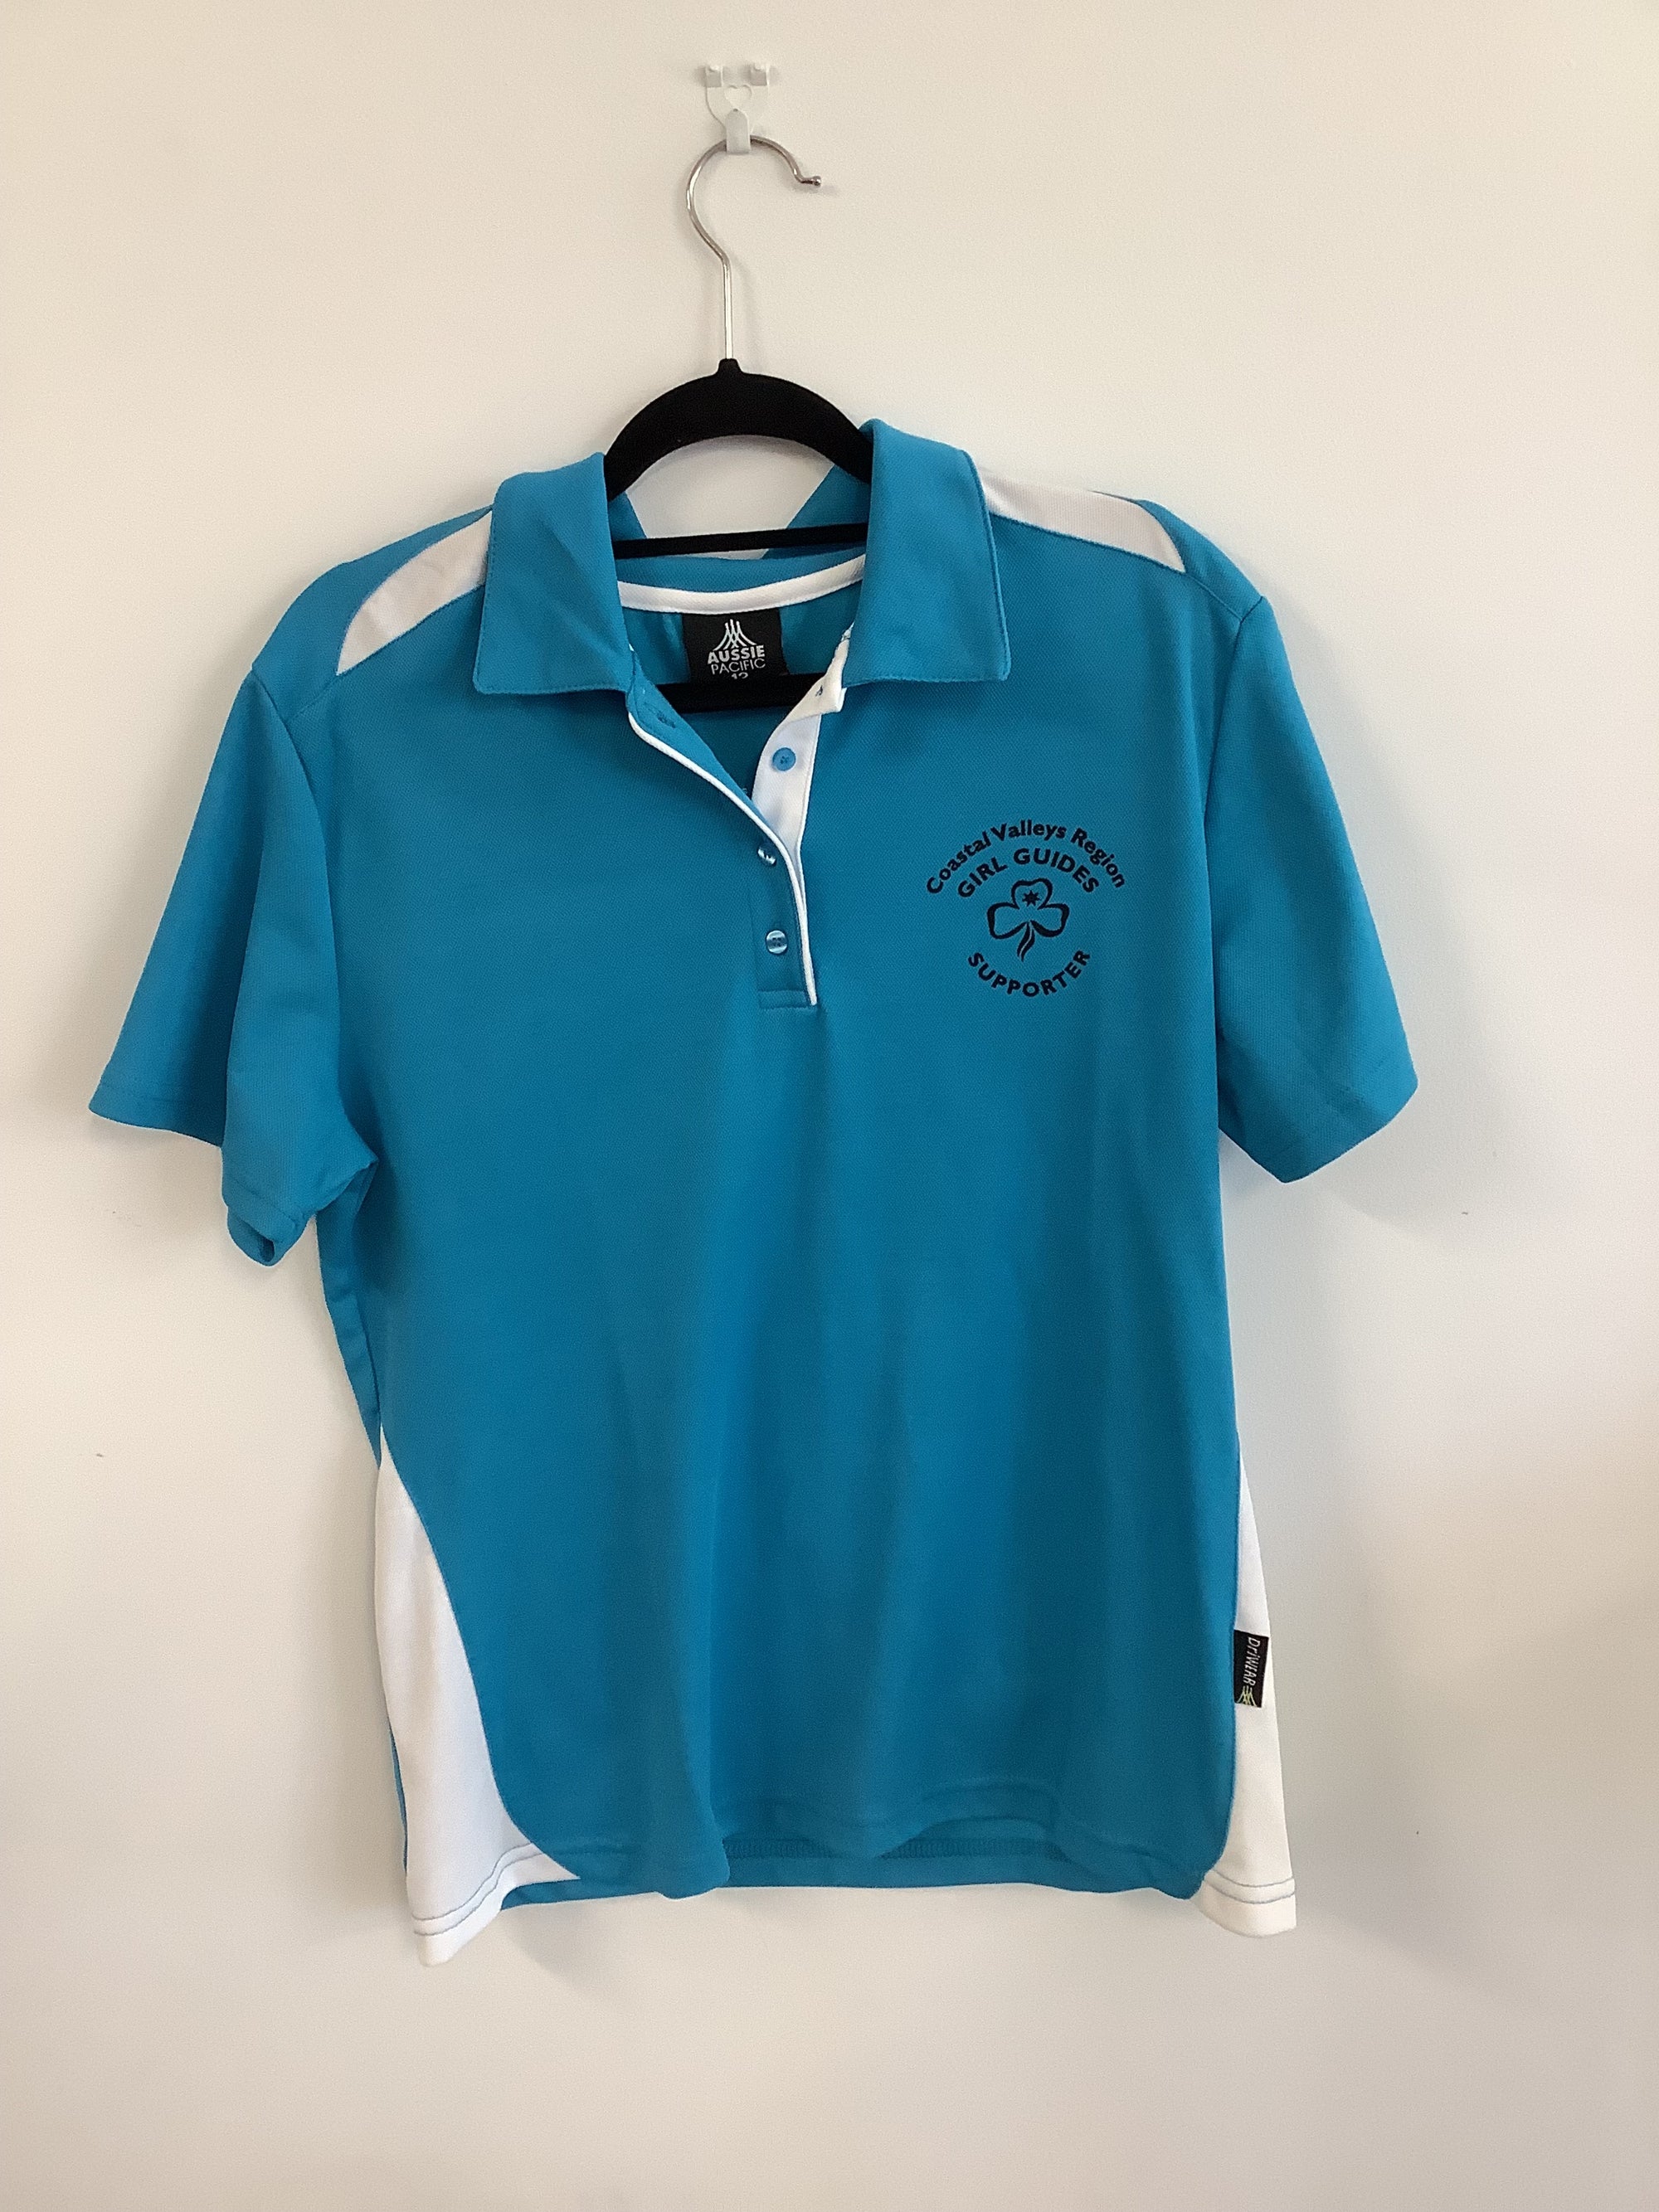 a blue and white polo shirt with a trefoil and CVR girl guides supporter printed on it